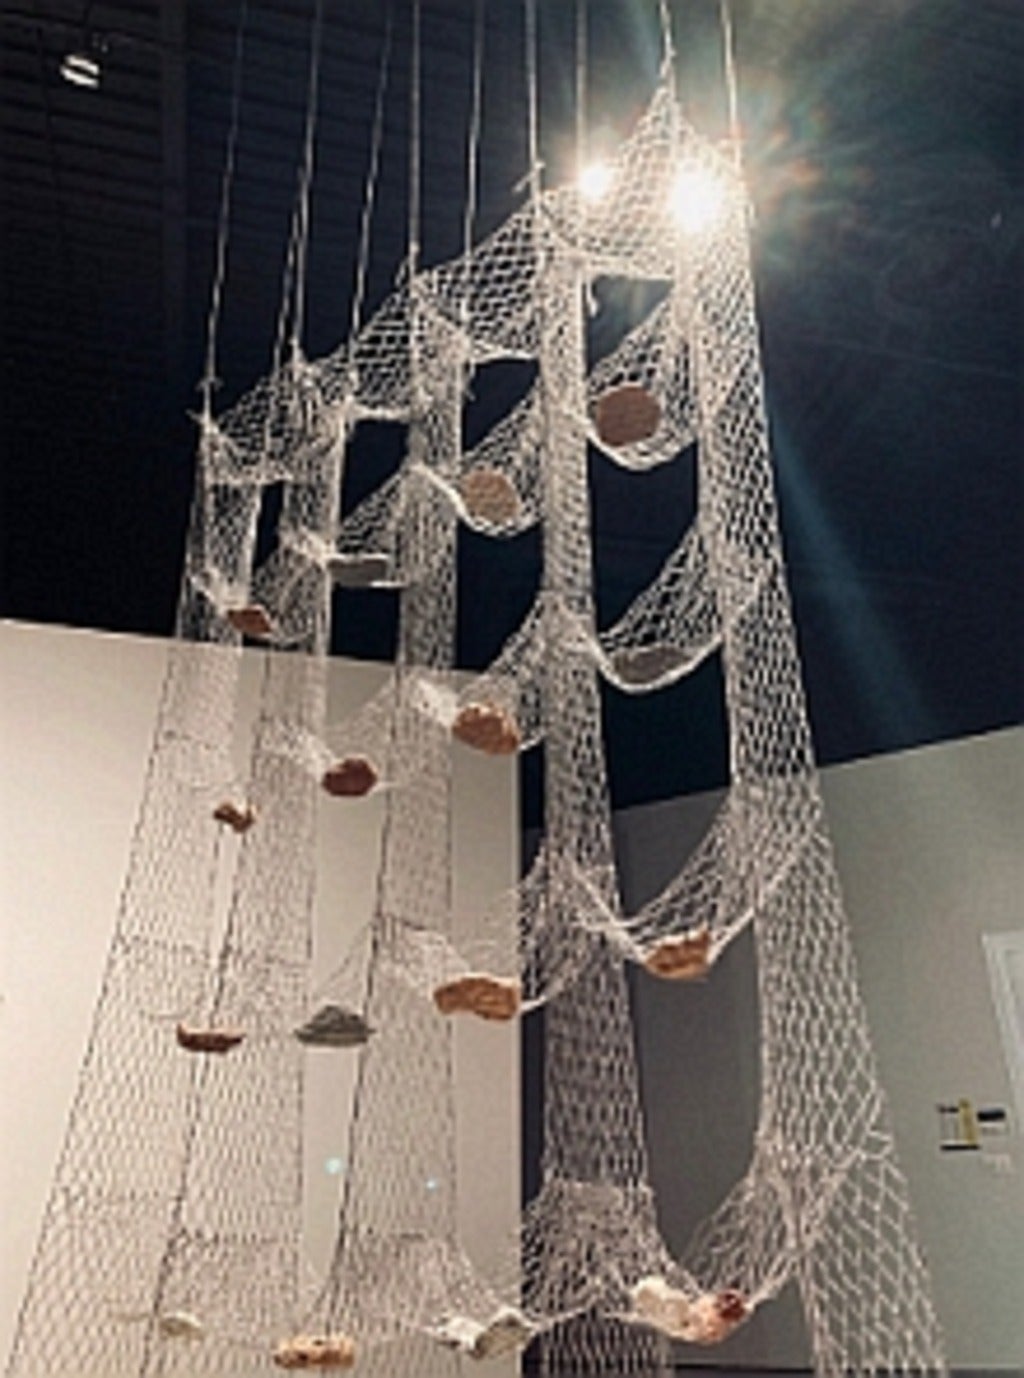 Detail of artwork suspended from a black ceiling. 4-by-4 sections of hammock-like net with each section holding a rock-like obje